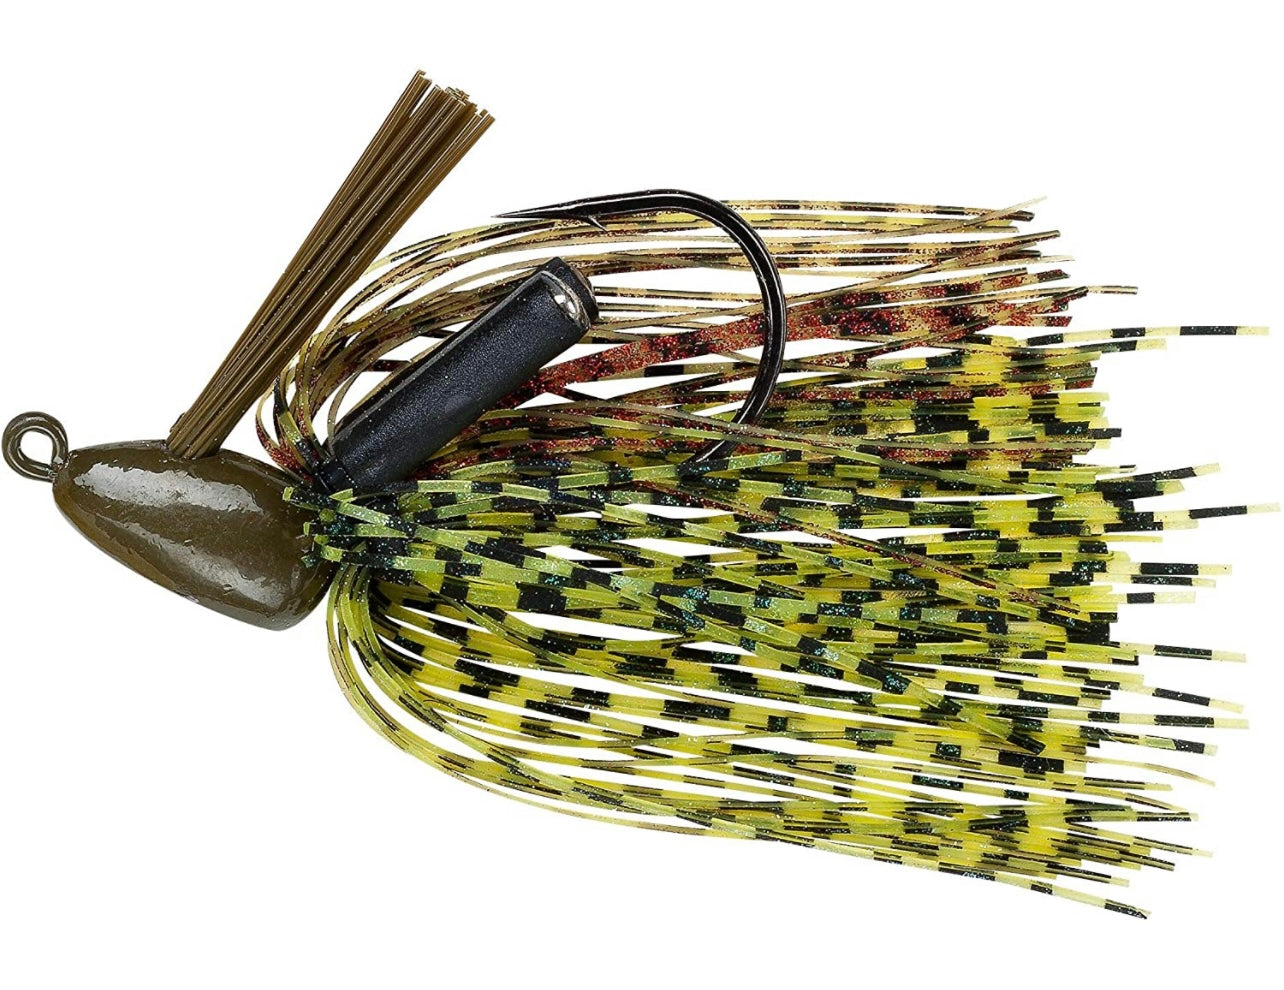 Booyah Boo Jig Bass Fishing Lure with Weed Guard